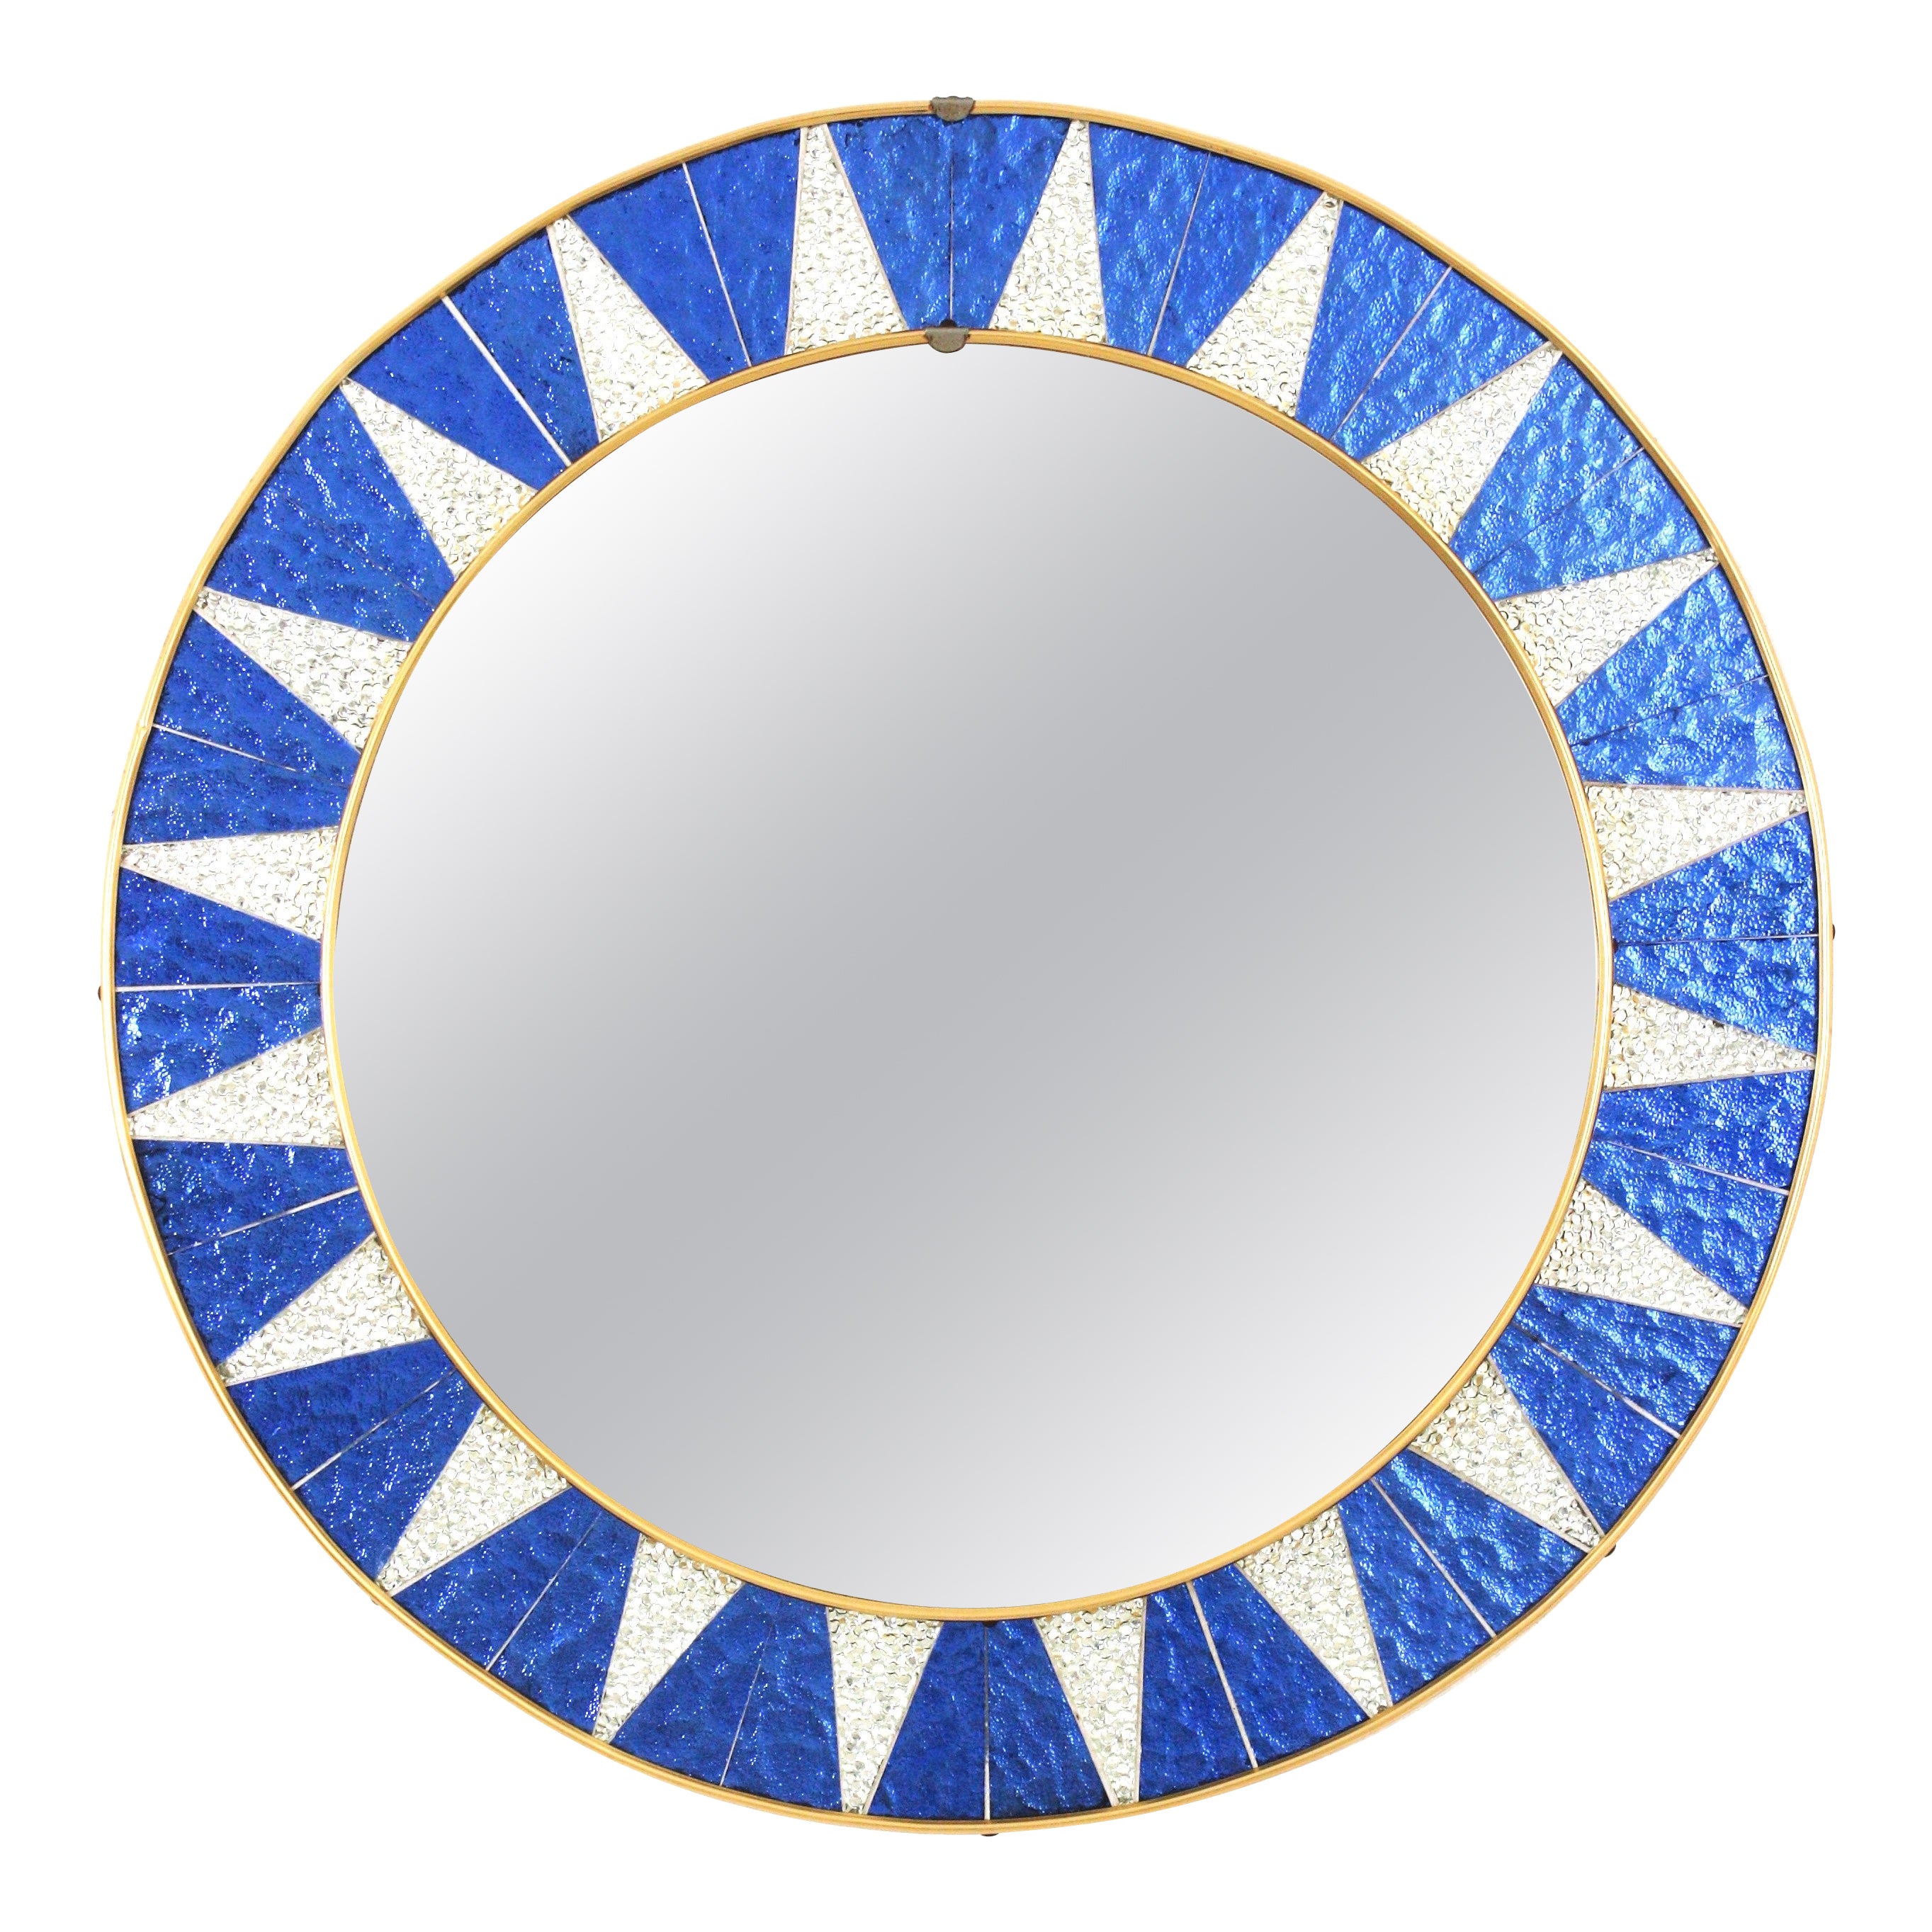 Sunburst Mirror with Blue and Silvered Mosaic Glass Frame, Spain, 1960s For Sale